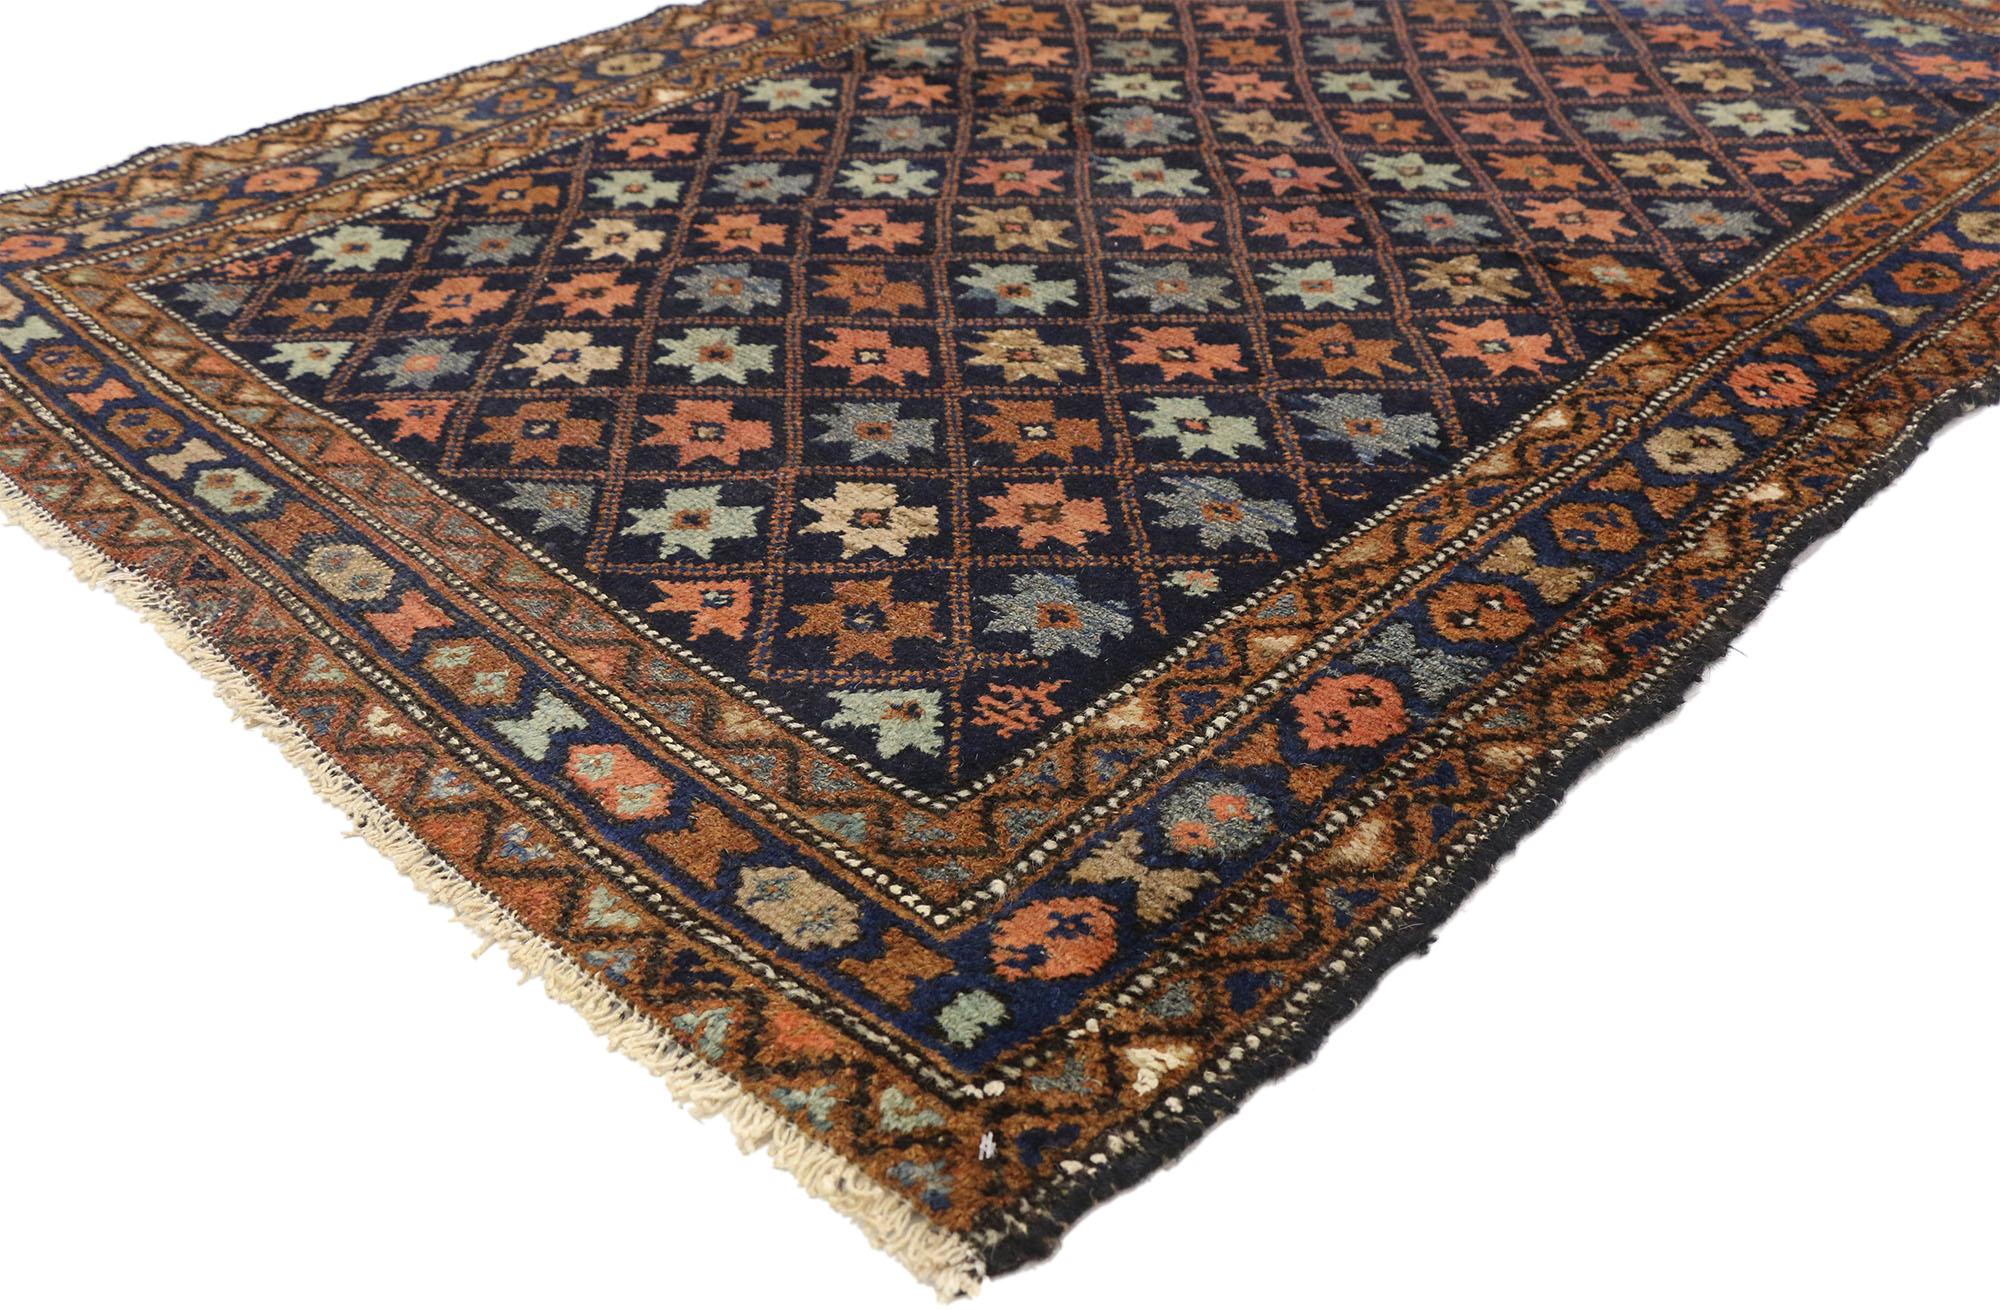 73301 Antique Persian Hamadan rug with Tribal Style 03'08 x 05'04. Full of tiny details and a bold expressive design combined with vibrant colors and tribal style, this hand-knotted wool antique Persian Hamadan rug is a captivating vision of woven